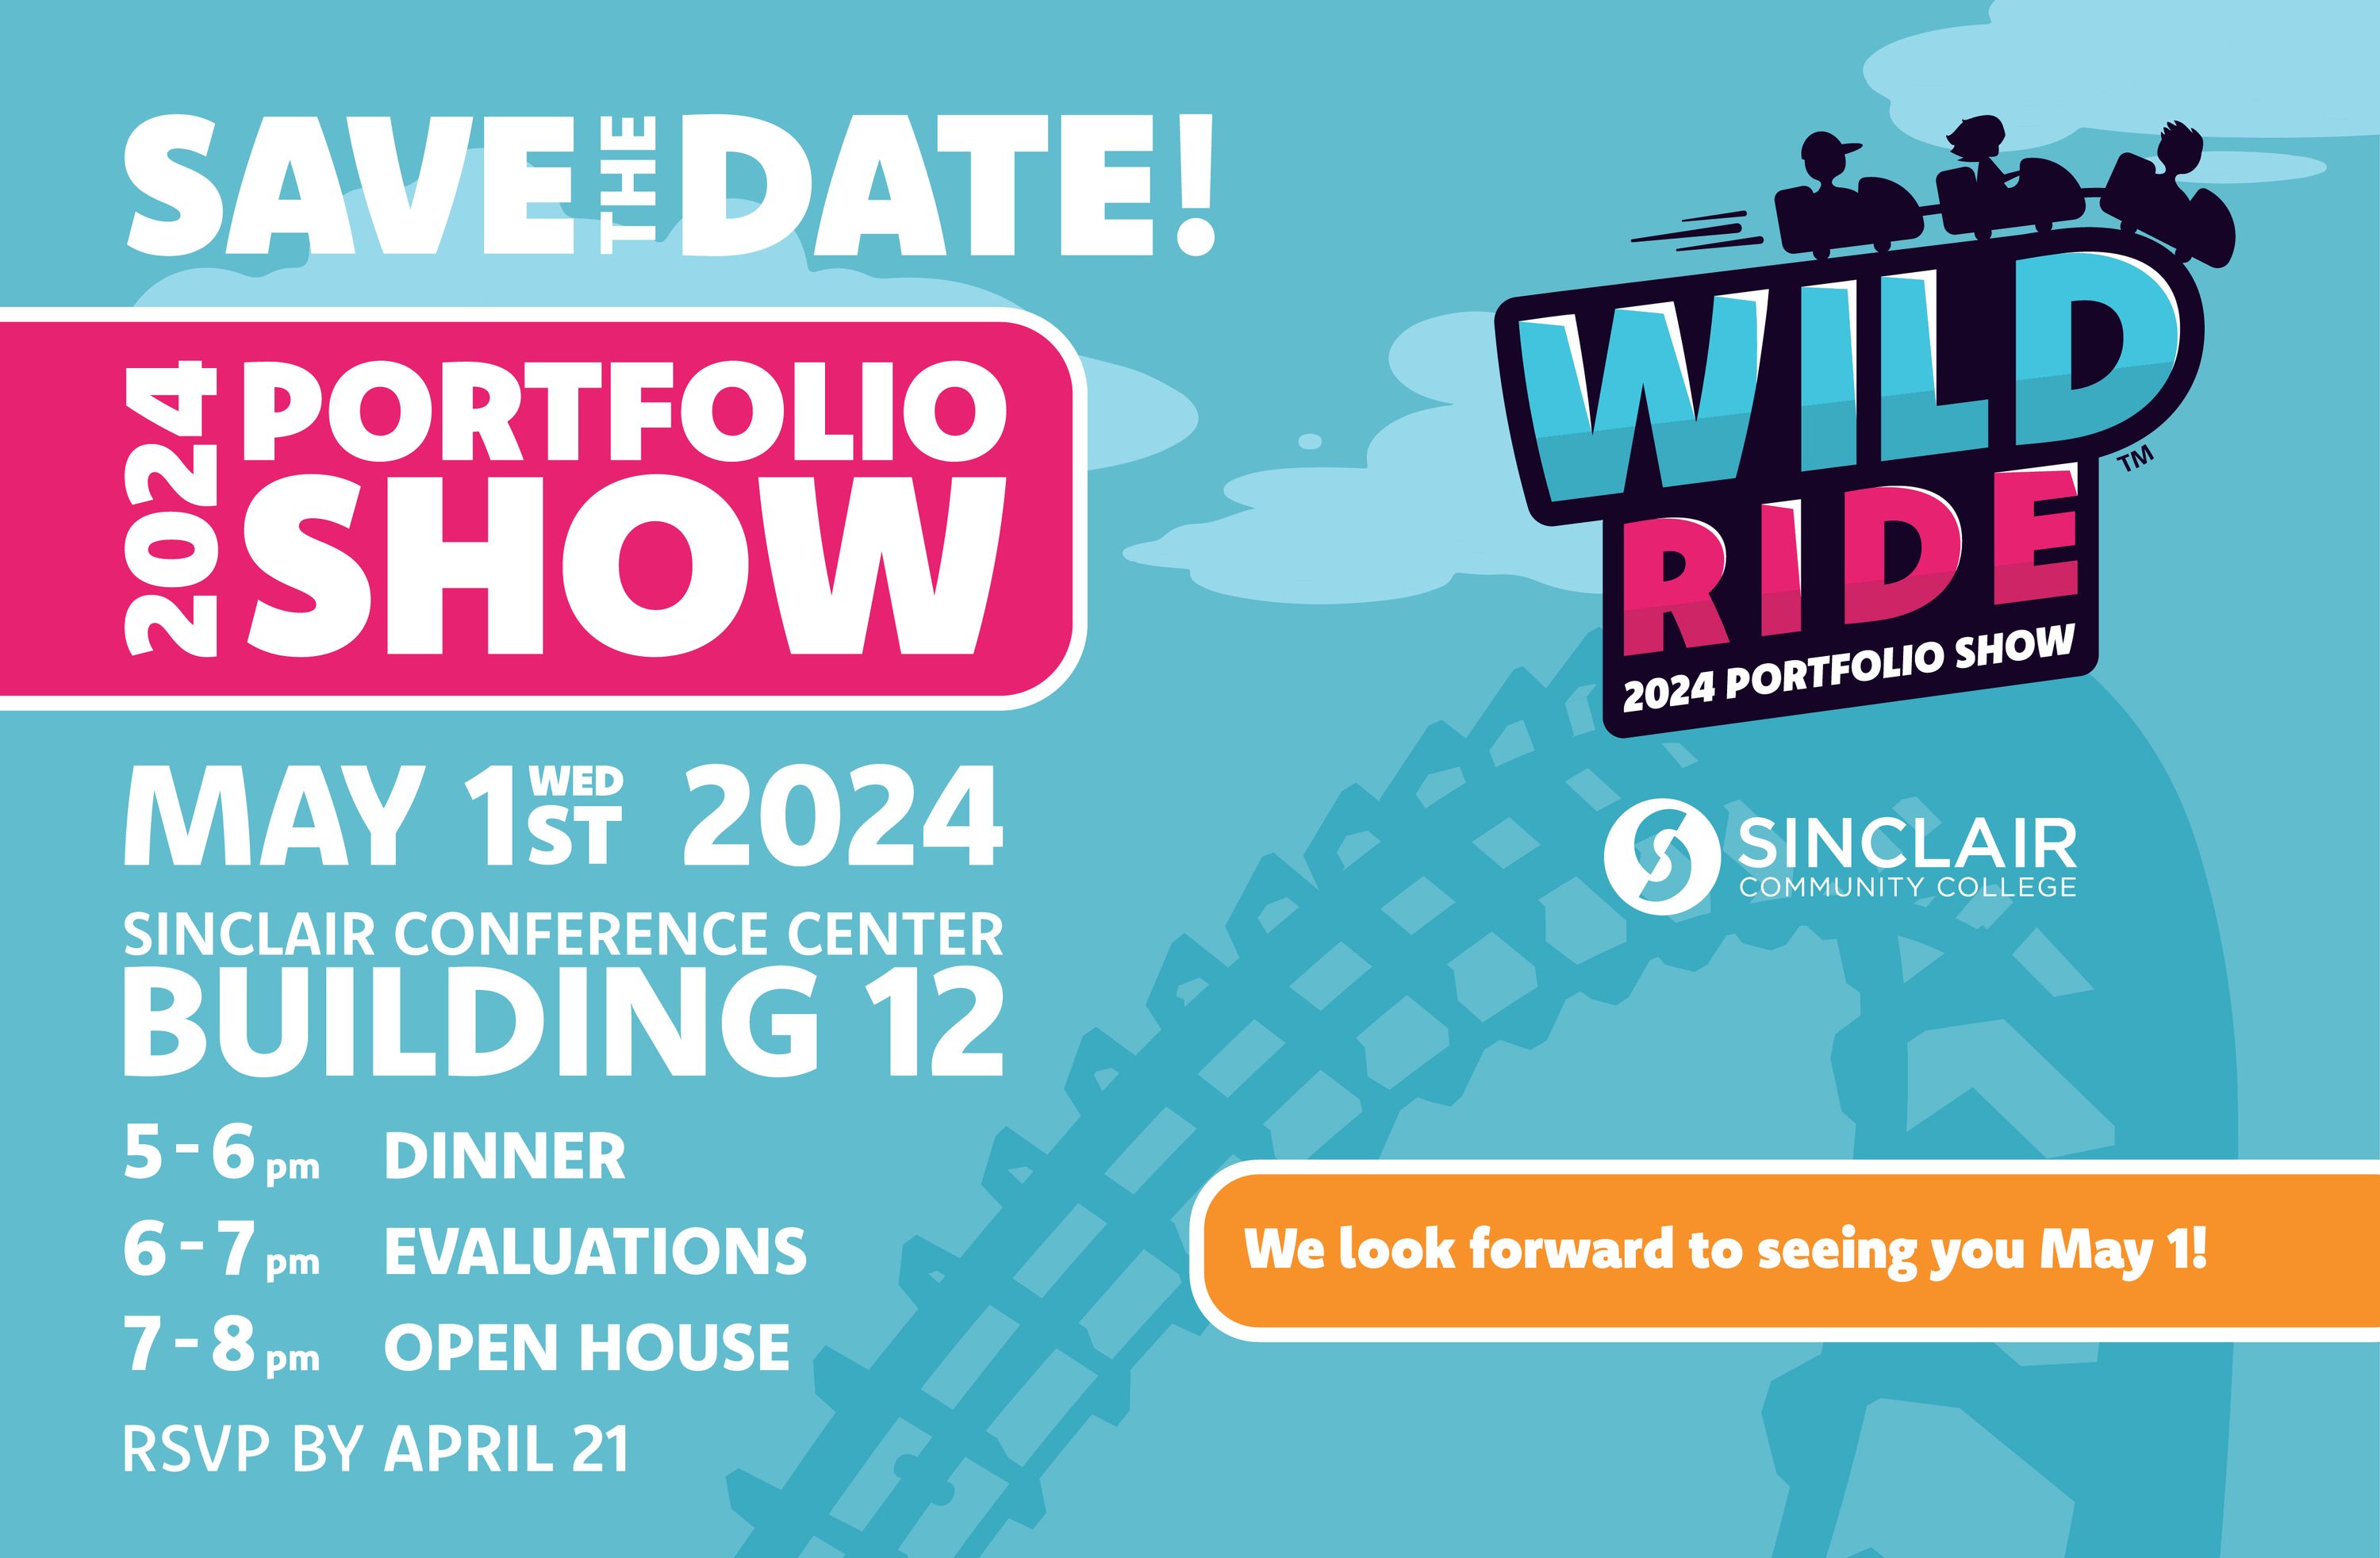 Save the Date for a Wild Ride May 1st